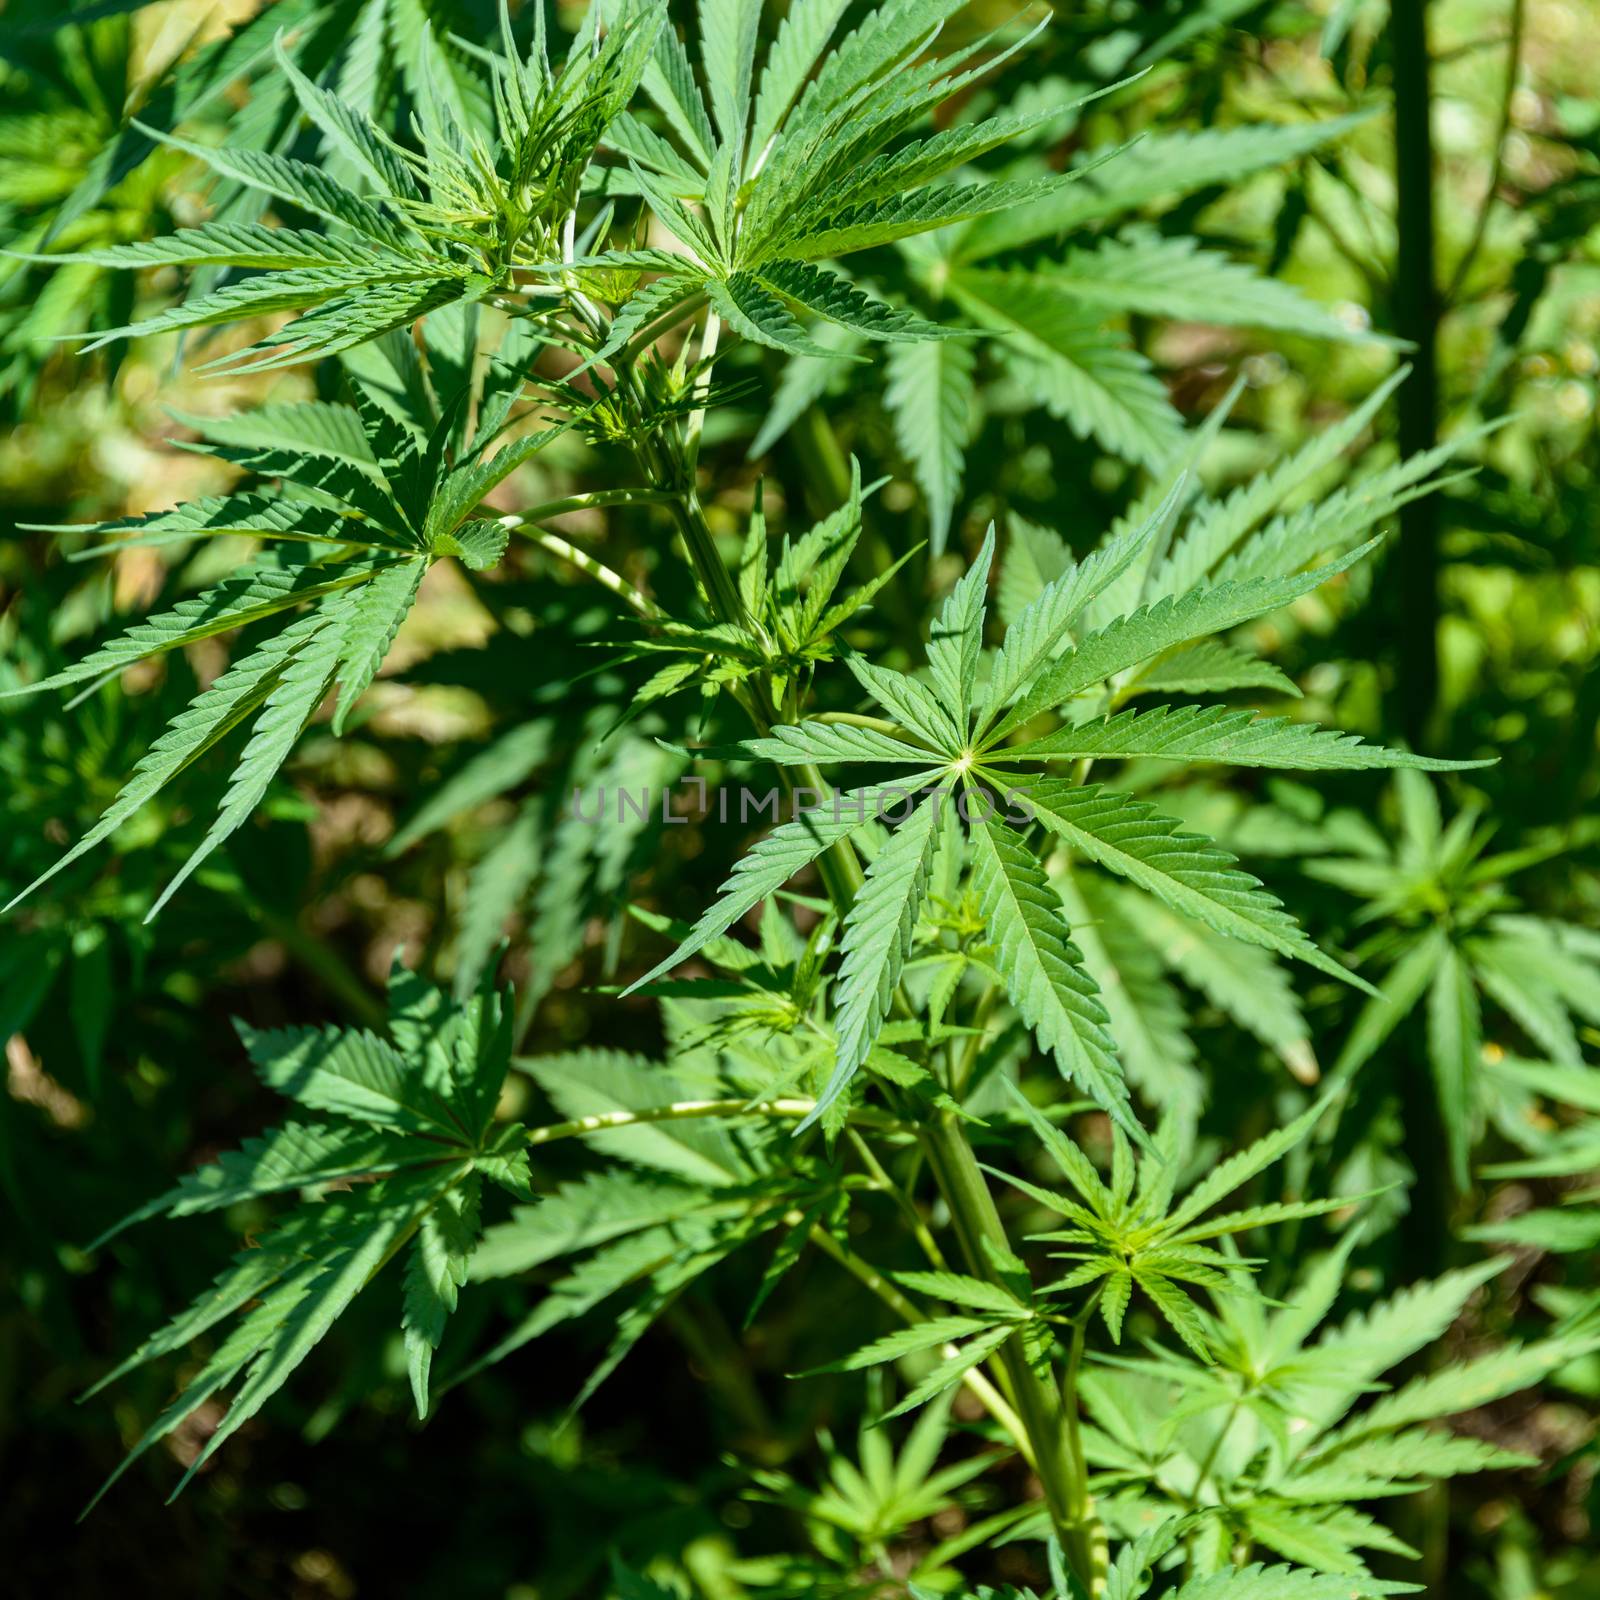 Cannabis plant detail growing as weed in Nepal